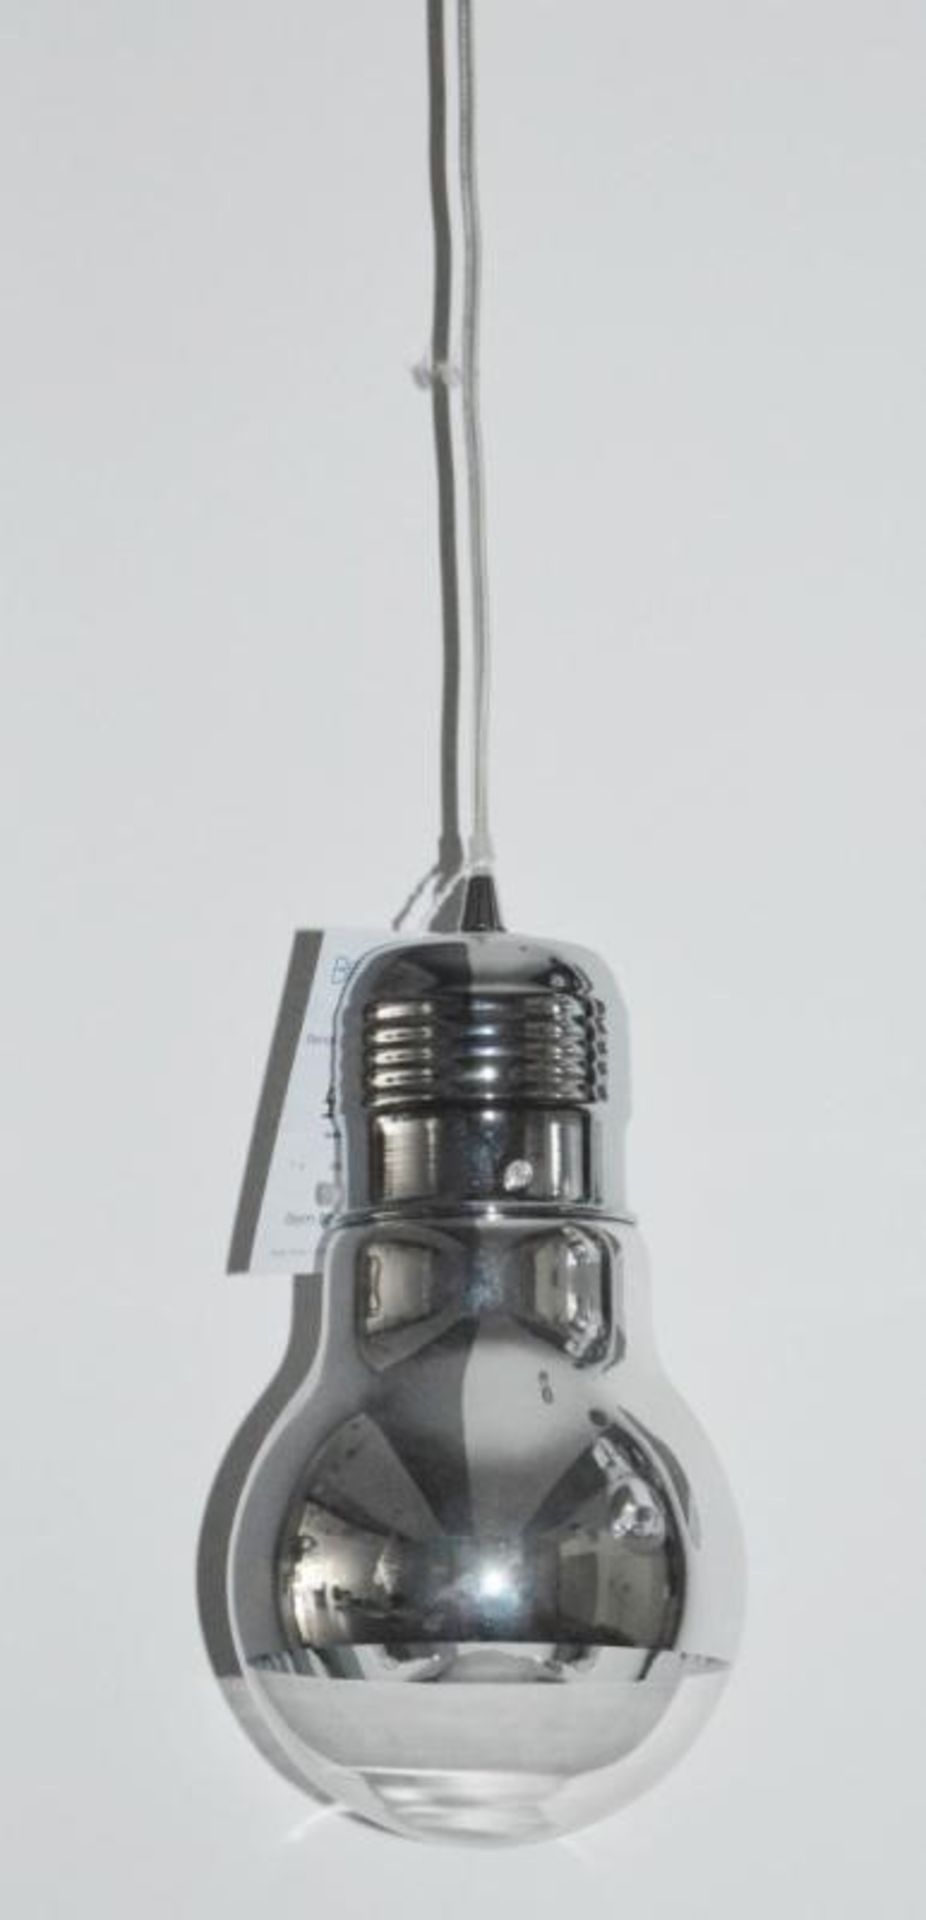 1 x Neo Chrome Large Bulb Pendant Light With Mirrored Clear Glass Shade - Adjustable Height - Quirky - Image 4 of 4